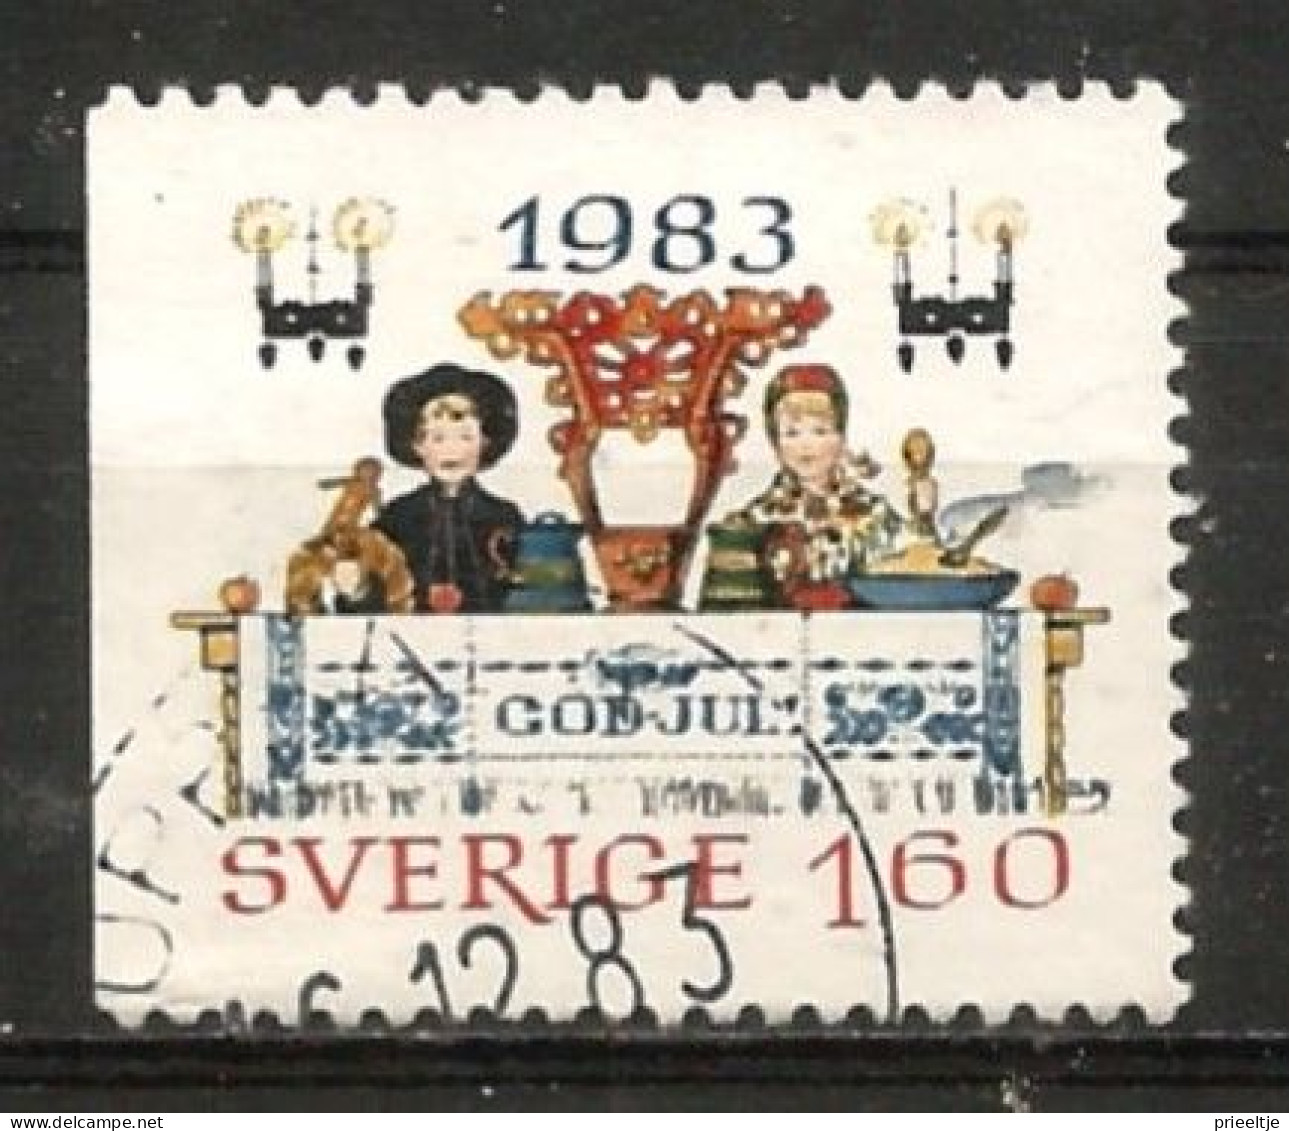 Sweden 1983 Christmas Greetings  Y.T. 1242 (0) - Used Stamps